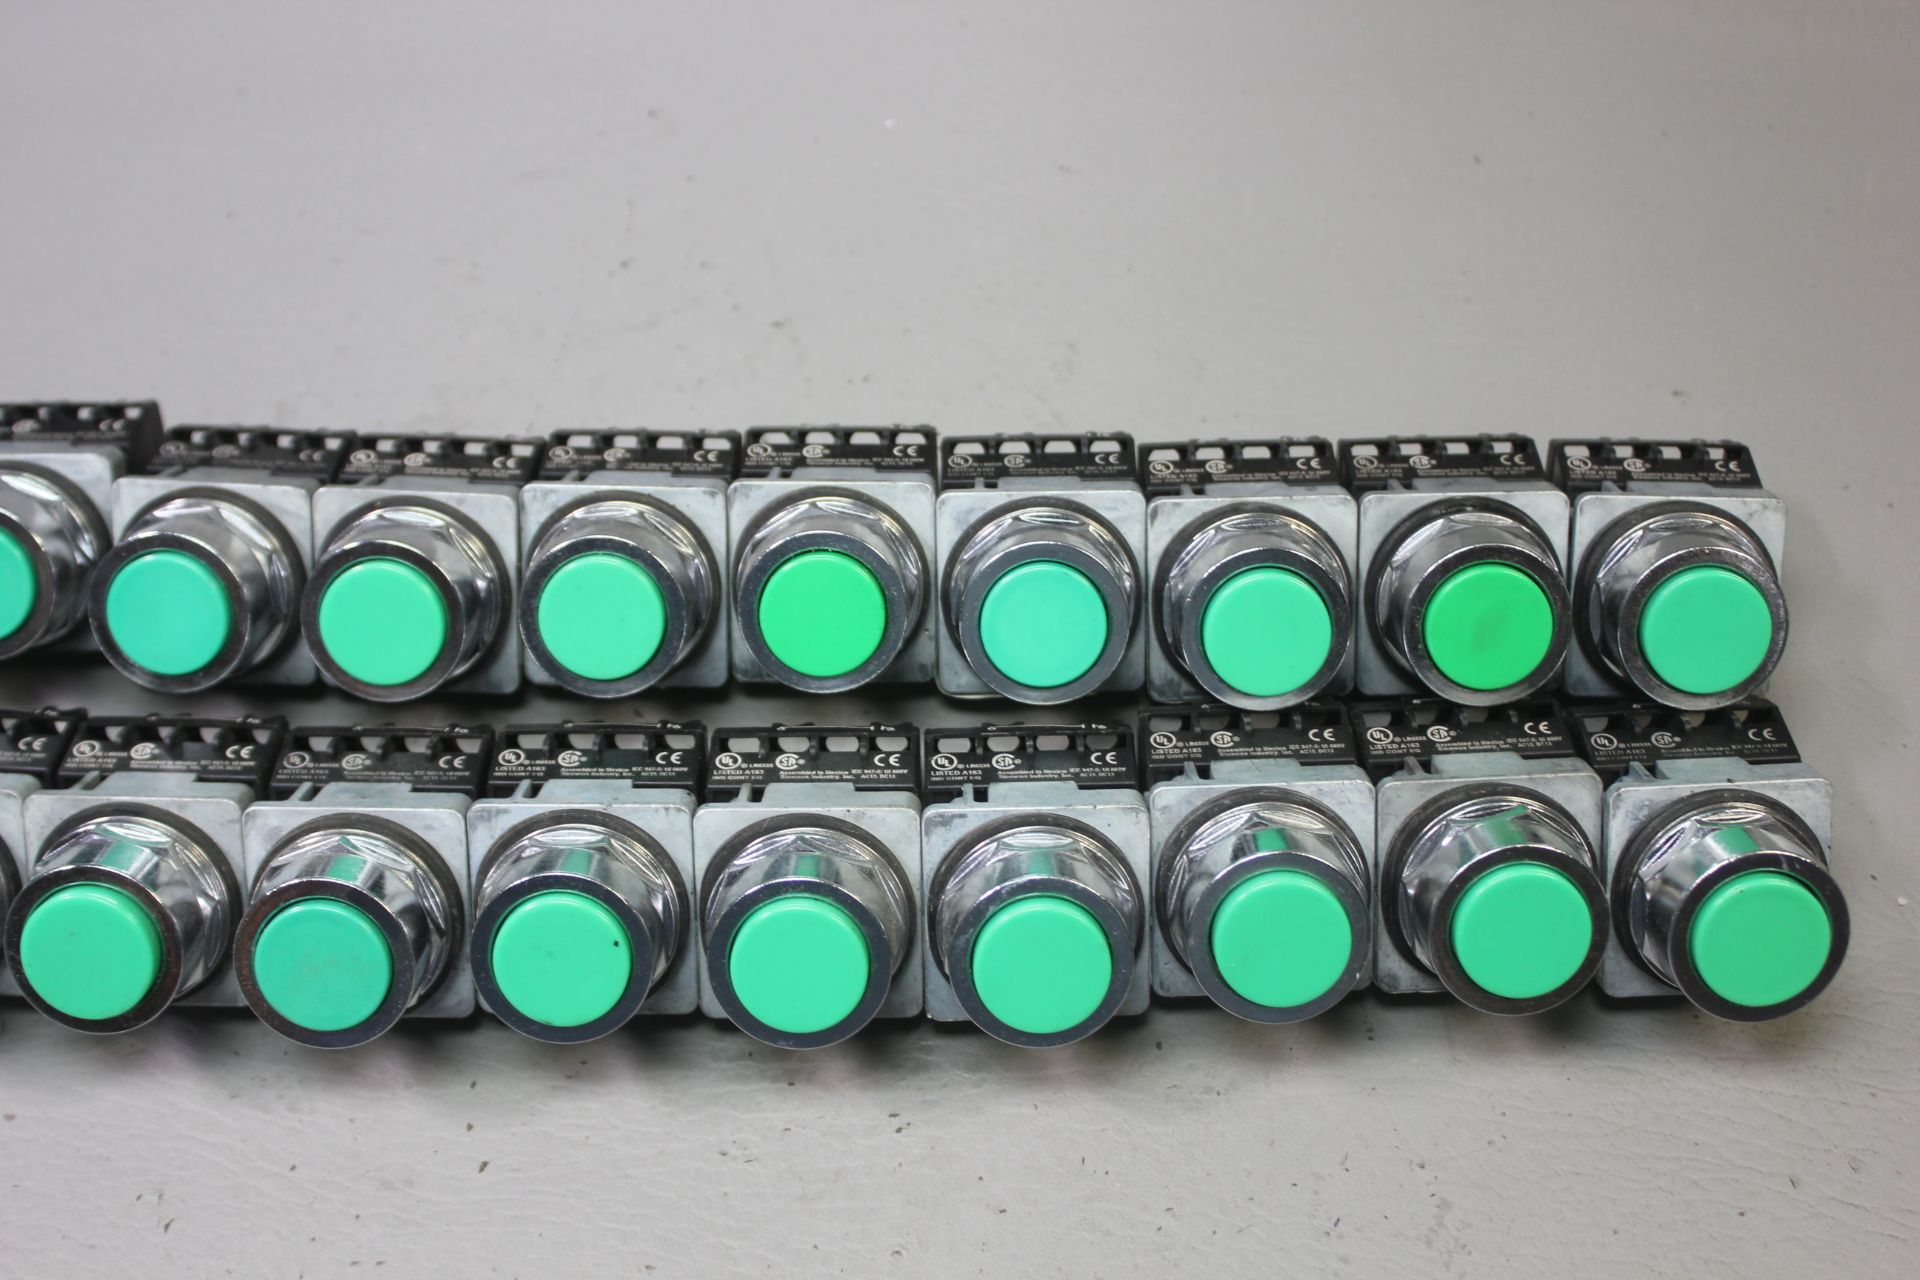 LOT OF 20 UNUSED SIEMENS GREEN OIL TIGHT PUSHBUTTONS - Image 3 of 8